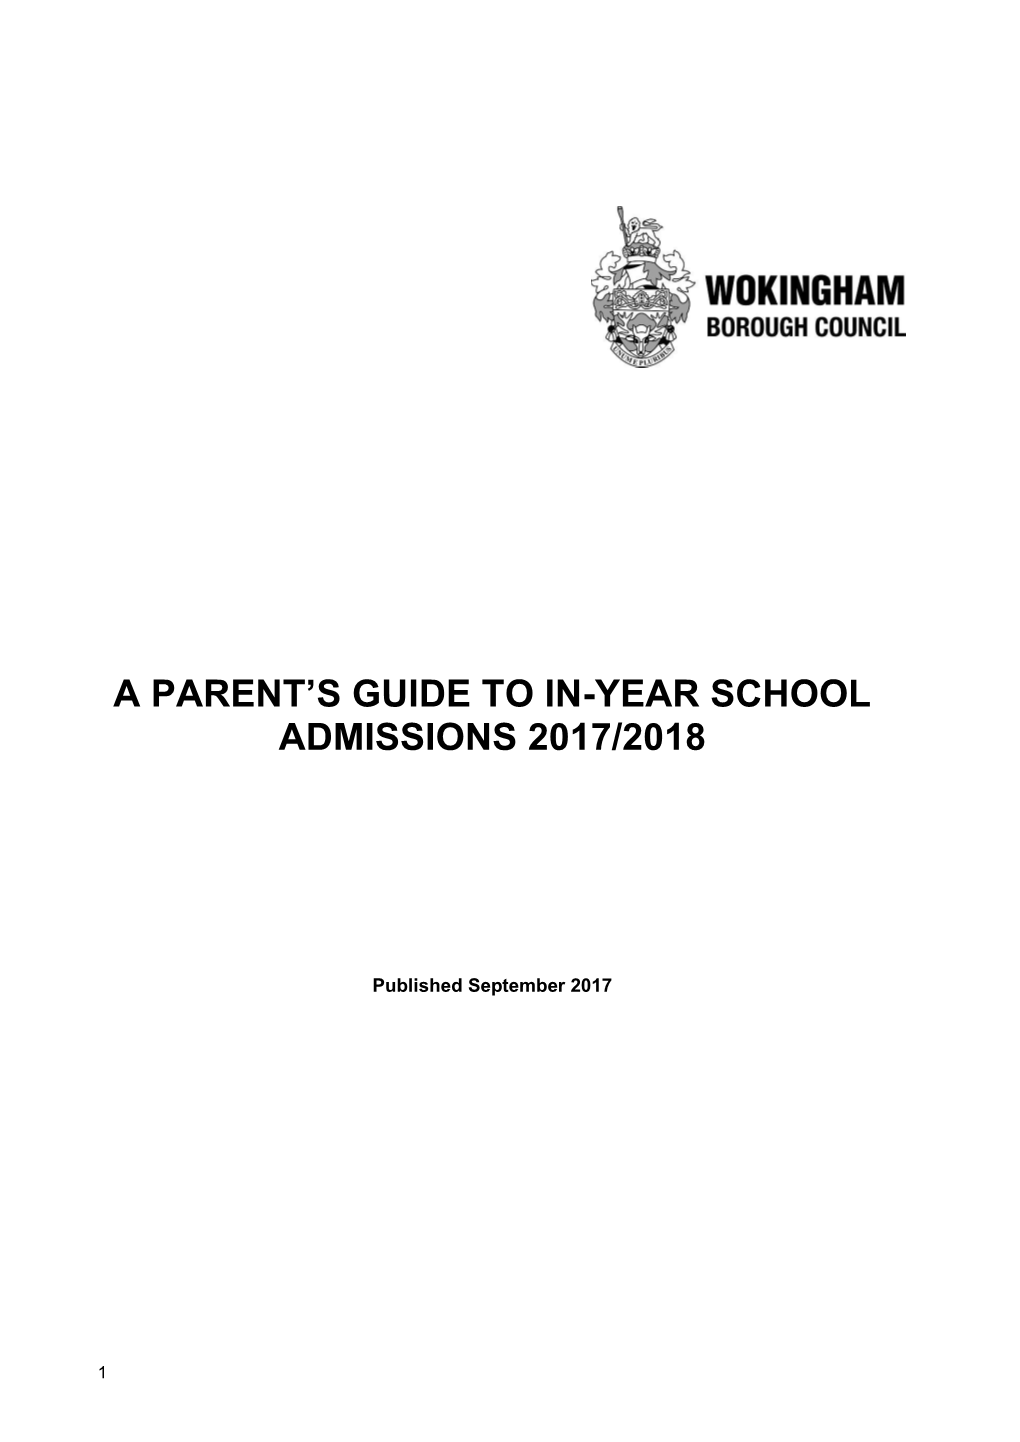 A Parent's Guide to In-Year School Admissions 2017/2018